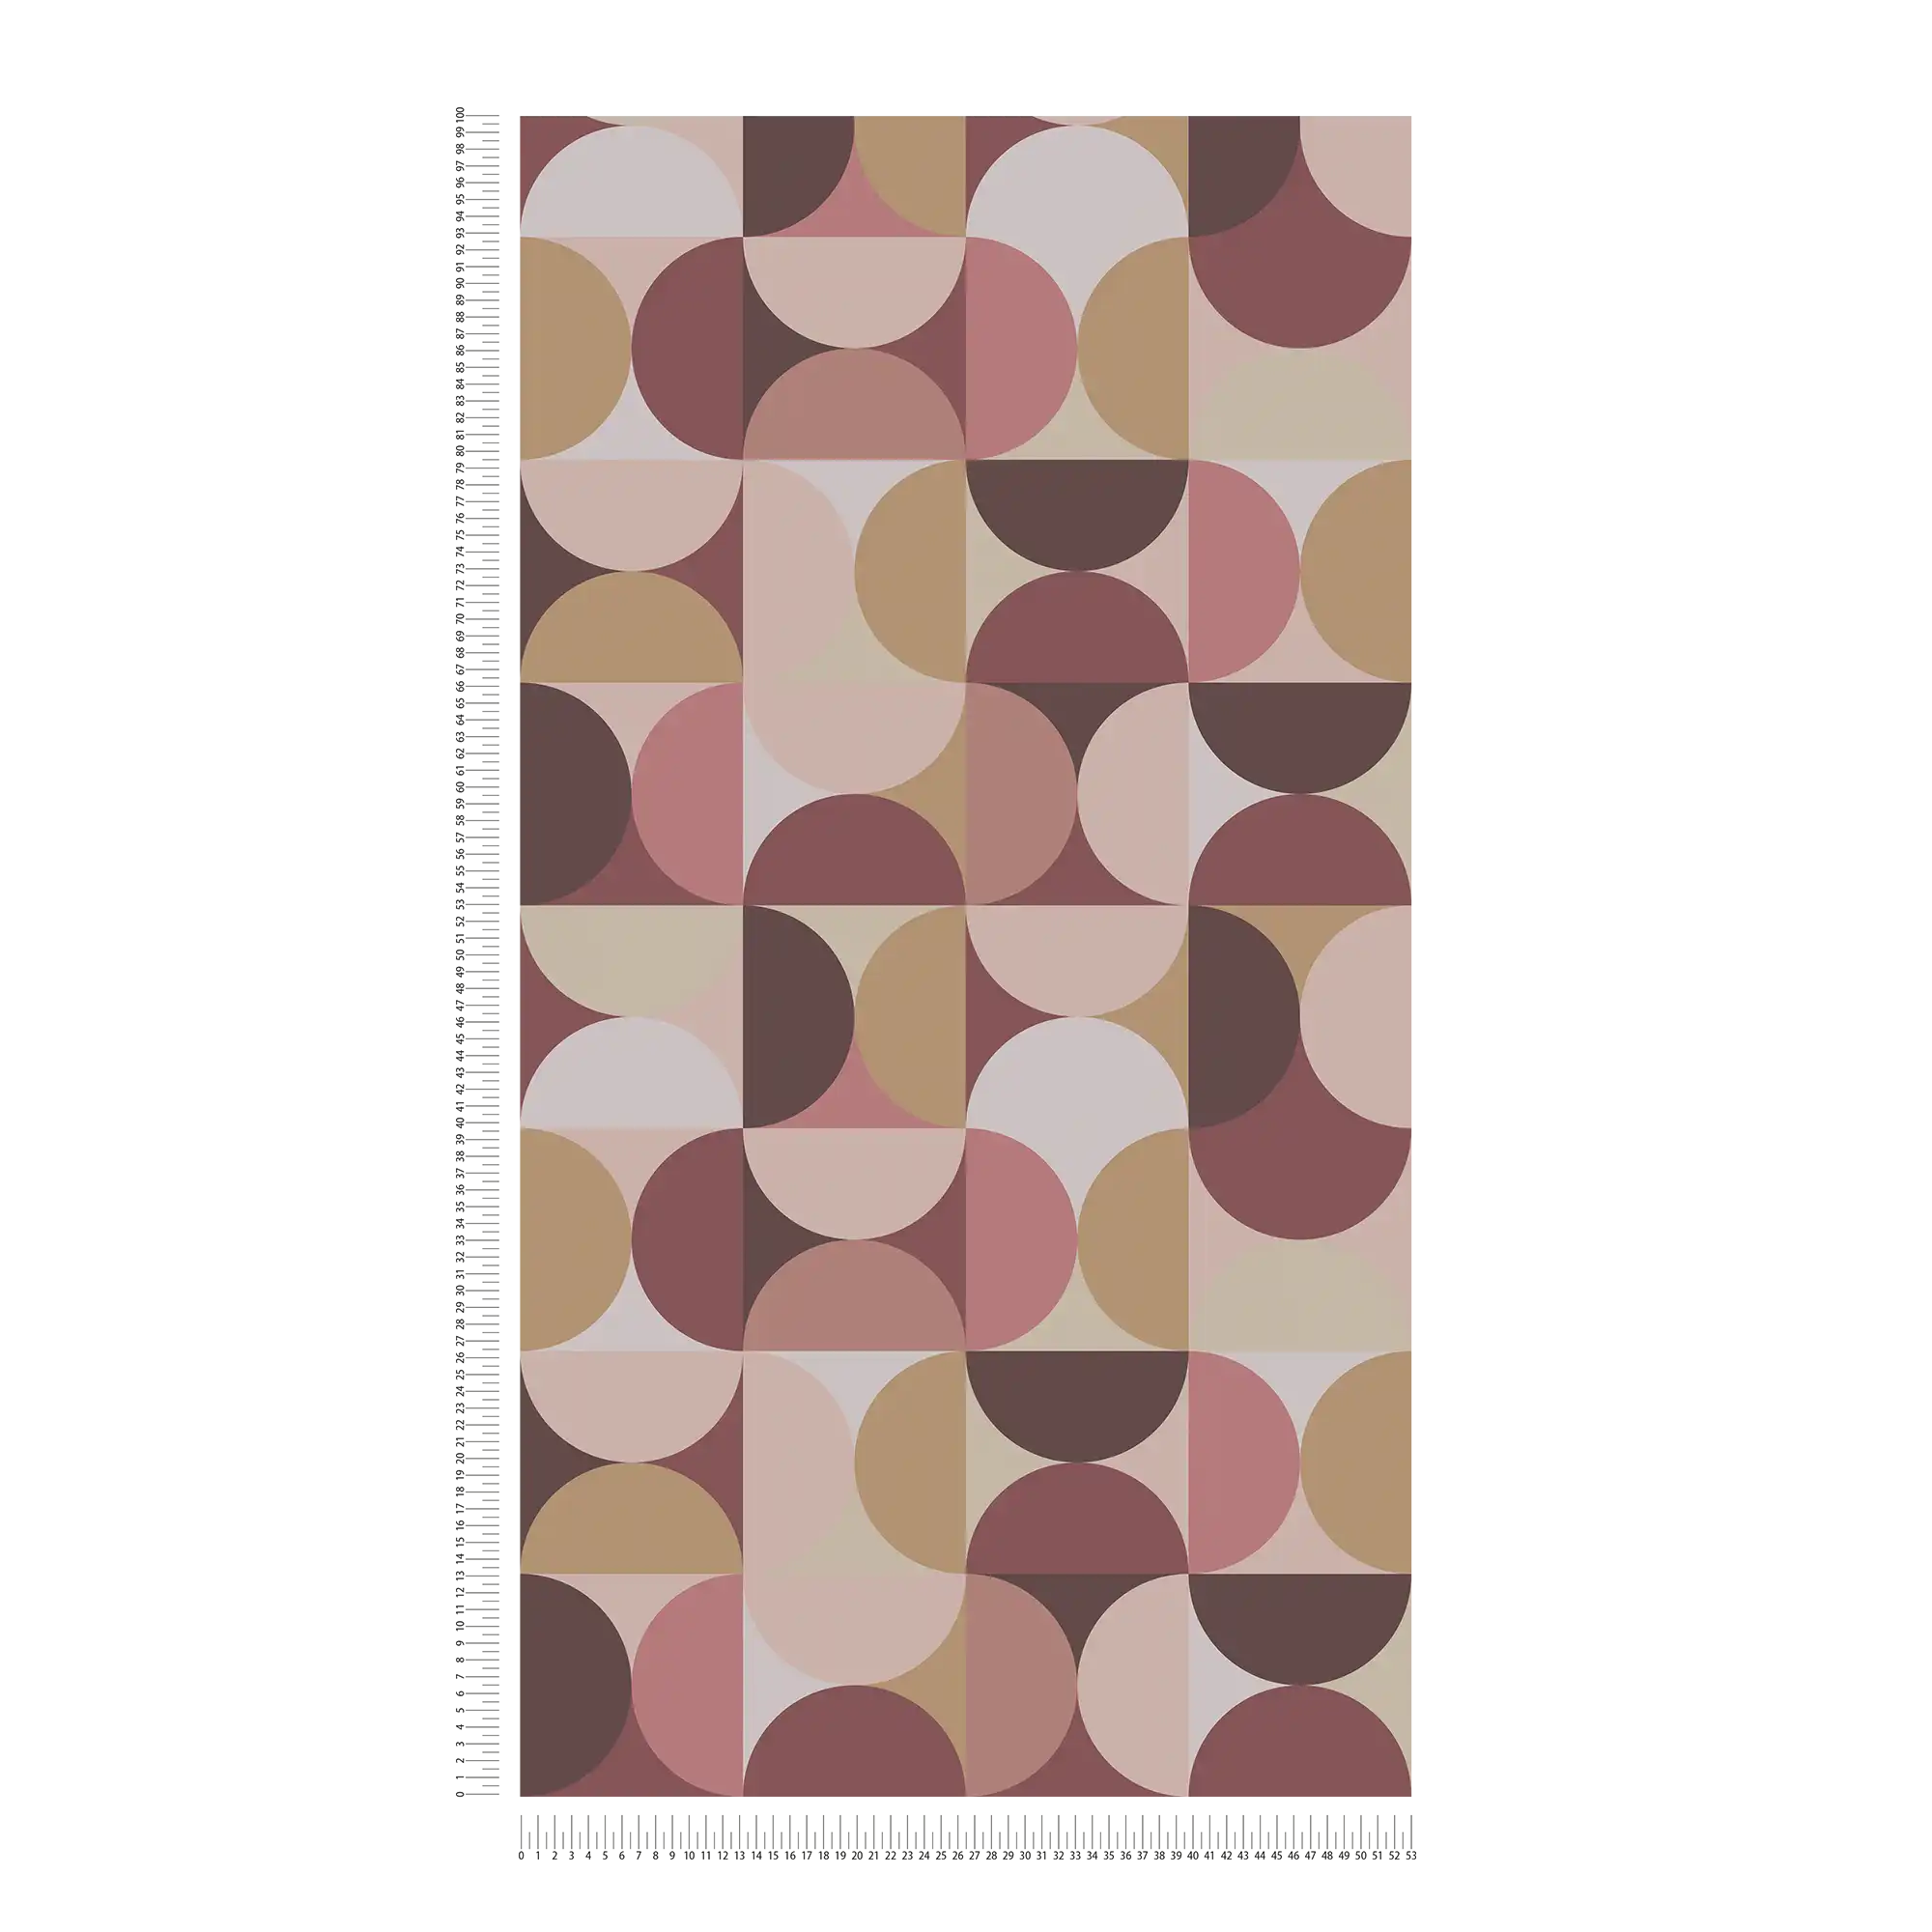             Graphic Semi-Circle Pattern Wallpaper in Retro 70s Style - Beige, Pink
        